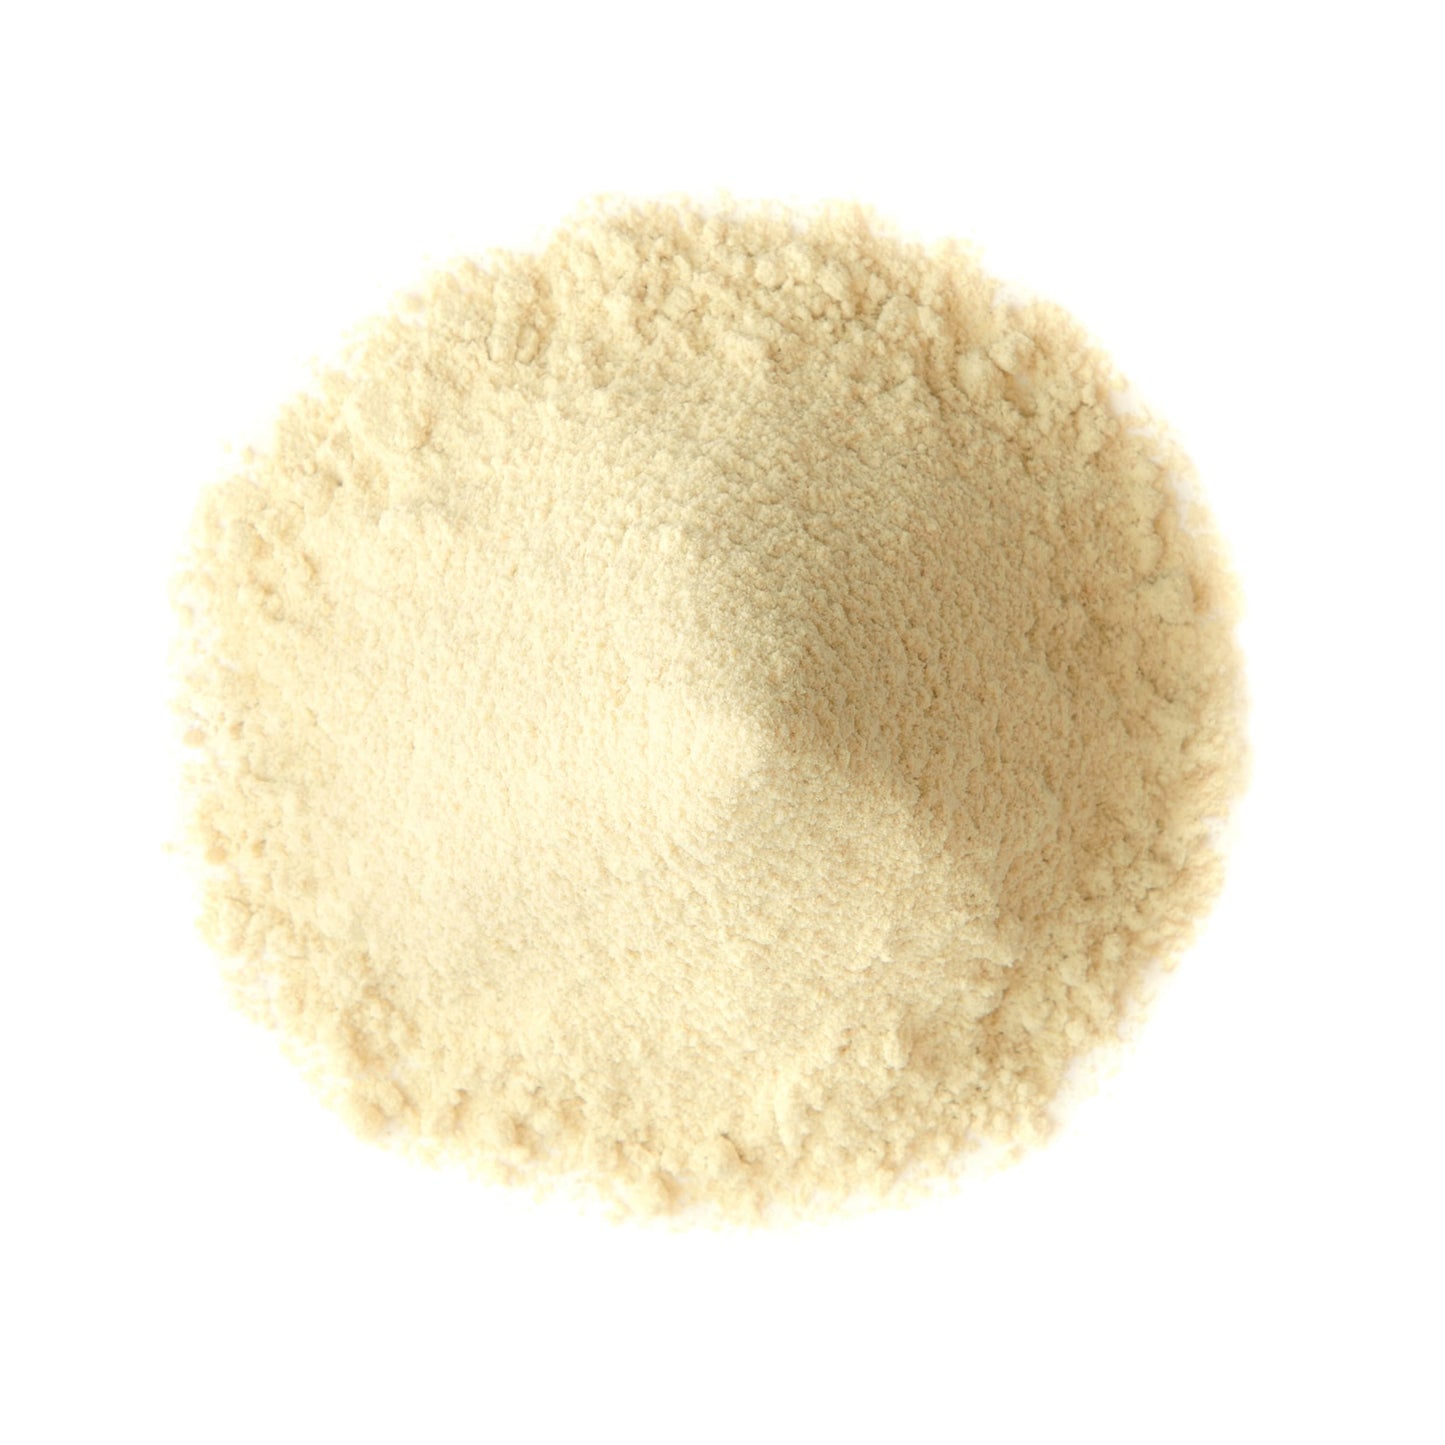 Organic Pineapple Powder - Non-GMO, Made from Raw Dried Fruit, Unsulfured, Vegan, Bulk, Great for Baking, Juices, Smoothies, Yogurts, and Instant Breakfast Drinks, No Sulphites